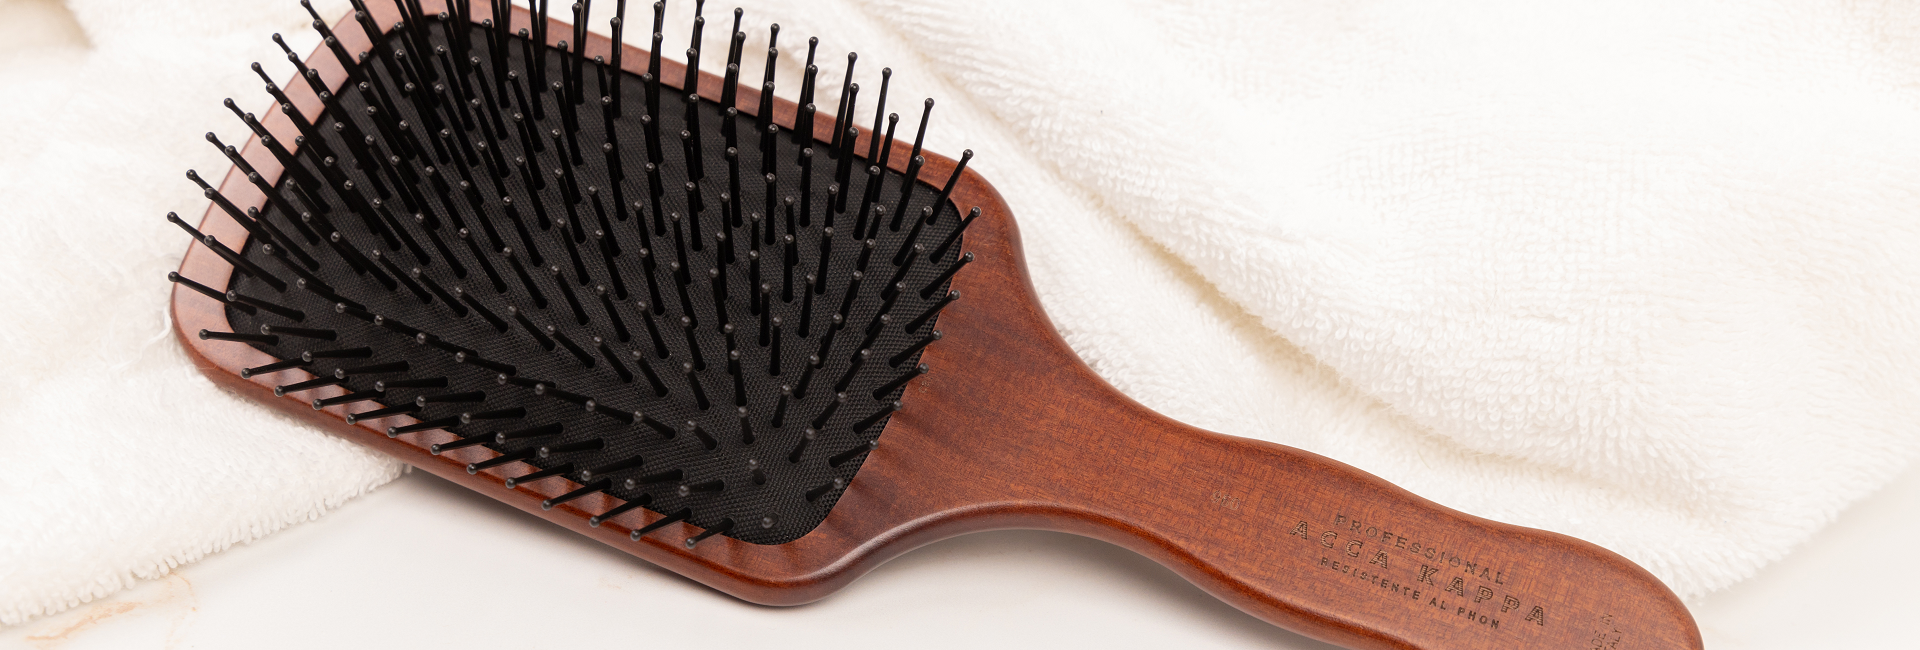 collections/Acca_Kappa_Professional_Hairbrushes_for_Daily_Use.png